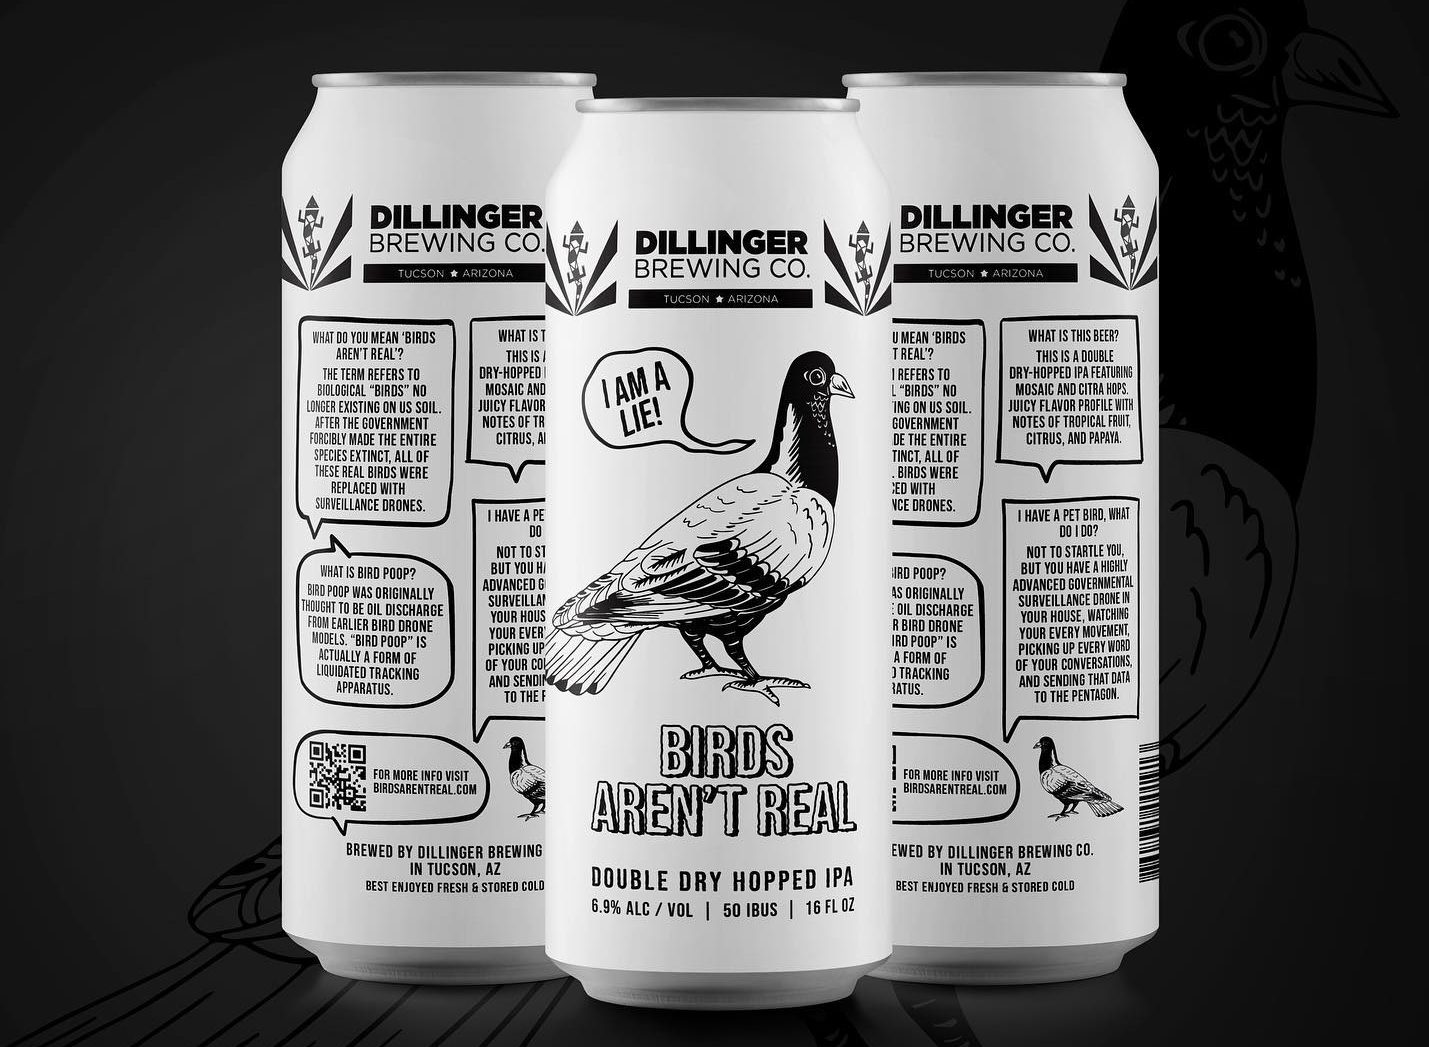 Dillinger Brewing Company